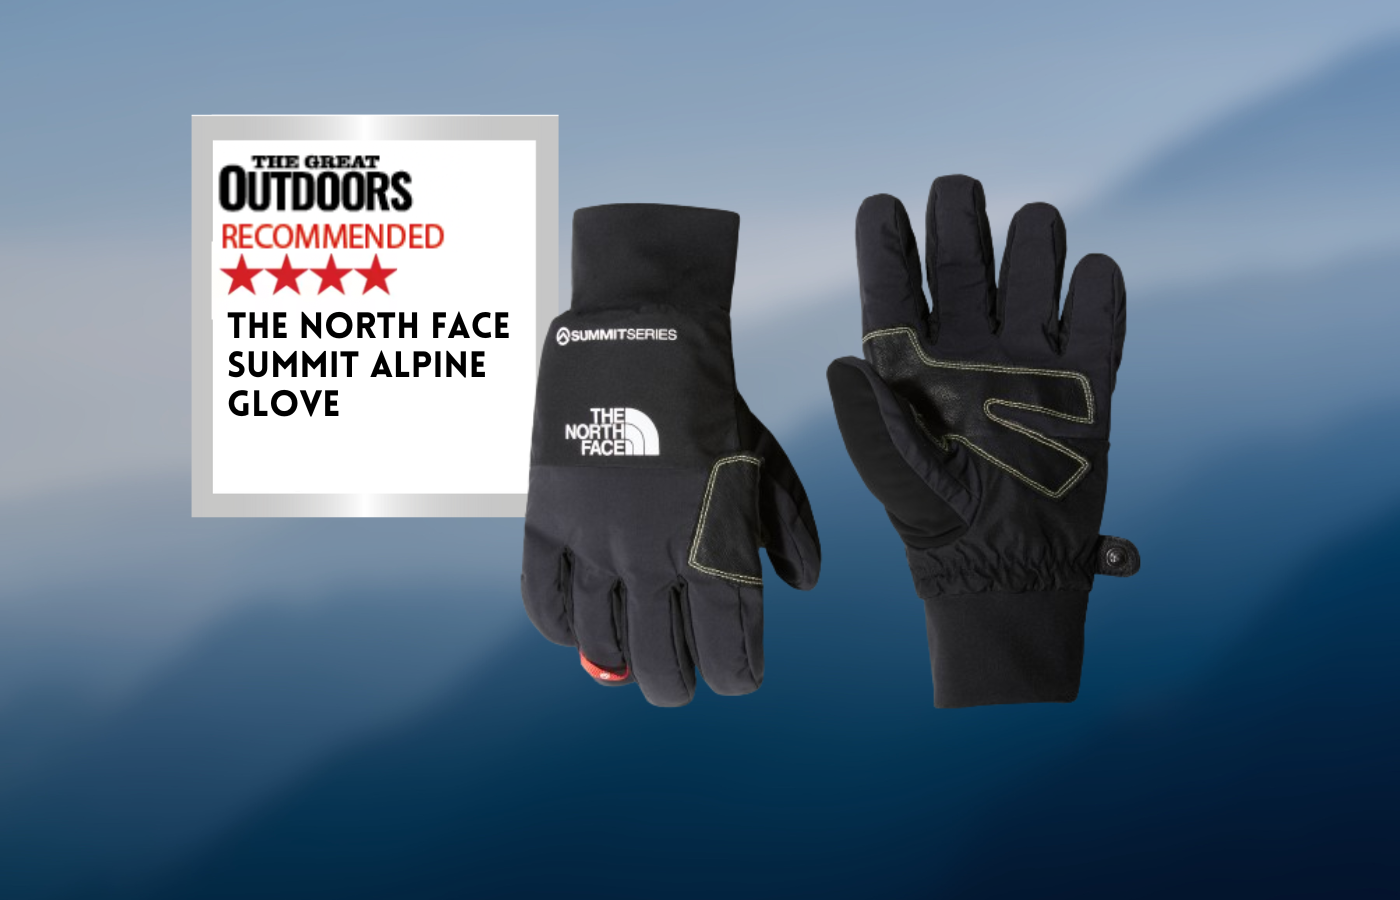 The North Face Summit Alpine glove Review